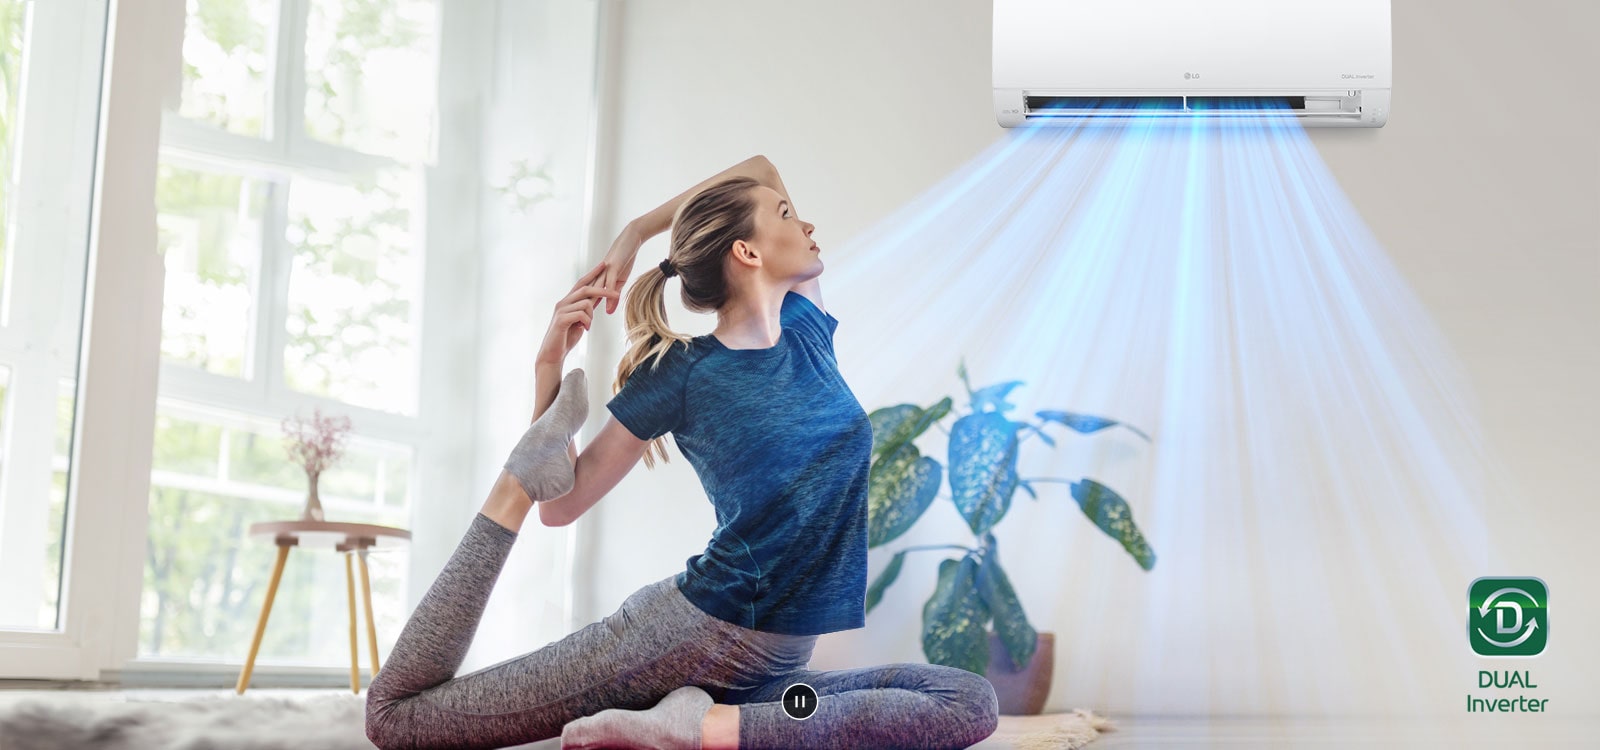 A woman is stretching on the floor. In the background is the air conditioner and blue air flows out over the woman and the room. The Dual Inverter logo is in the bottom right corner.